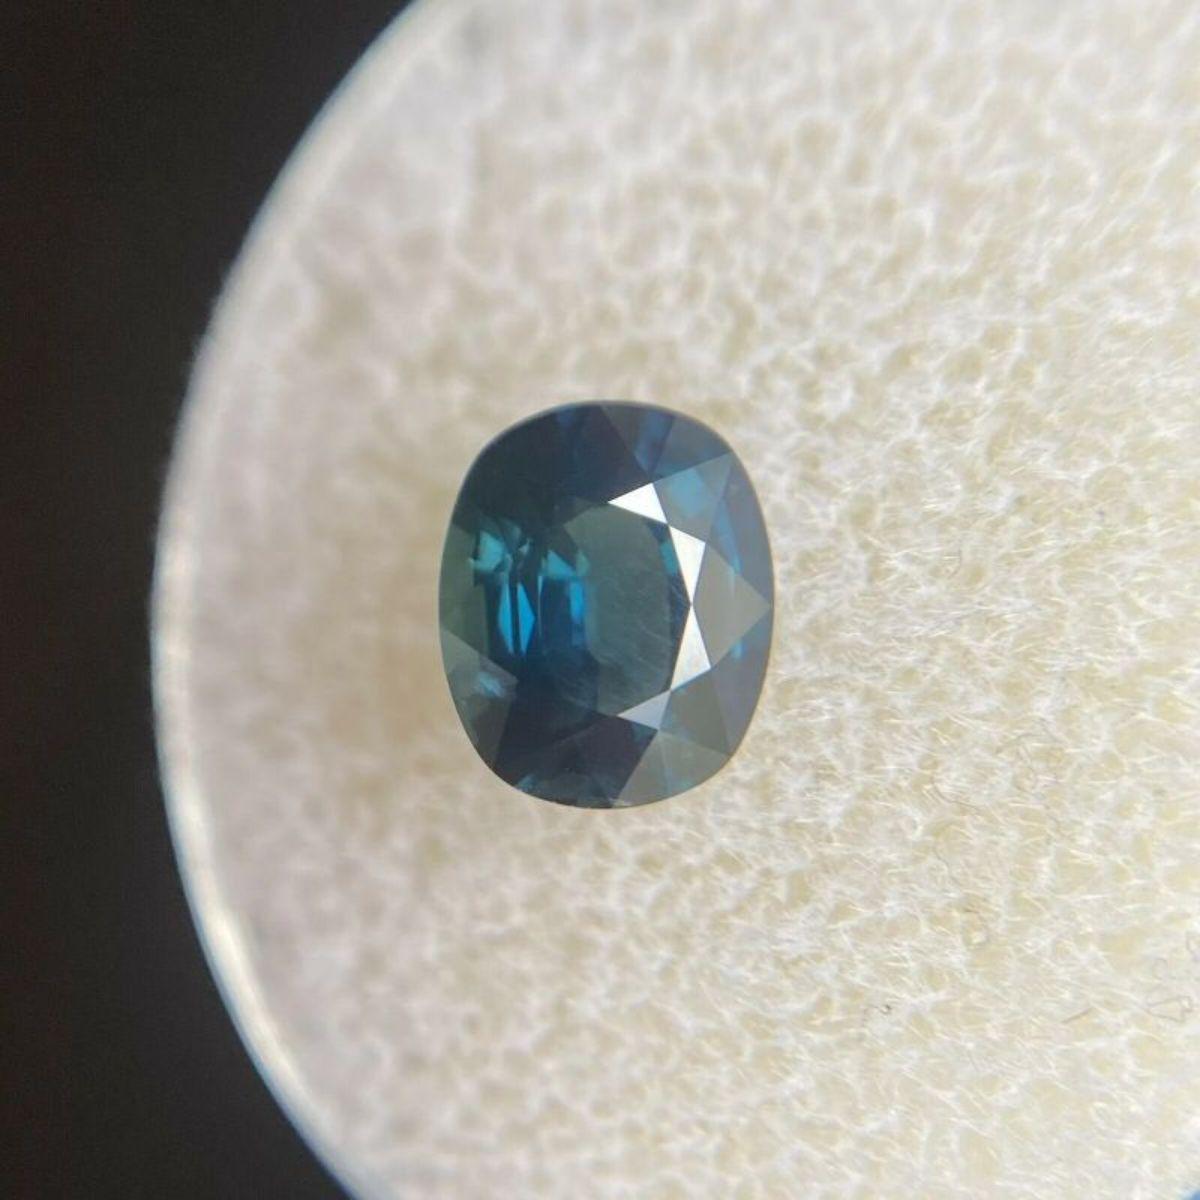 Fine Deep Teal Blue Sapphire 1.55ct Cushion Cut Rare Natural Gem 7.4 x 6.2mm

Fine Deep Teal Blue Sapphire Gemstone. 
Natural sapphire with a stunning deep teal blue colour. 1.55 Carat with excellent clarity. Practically flawless. 
Also has an